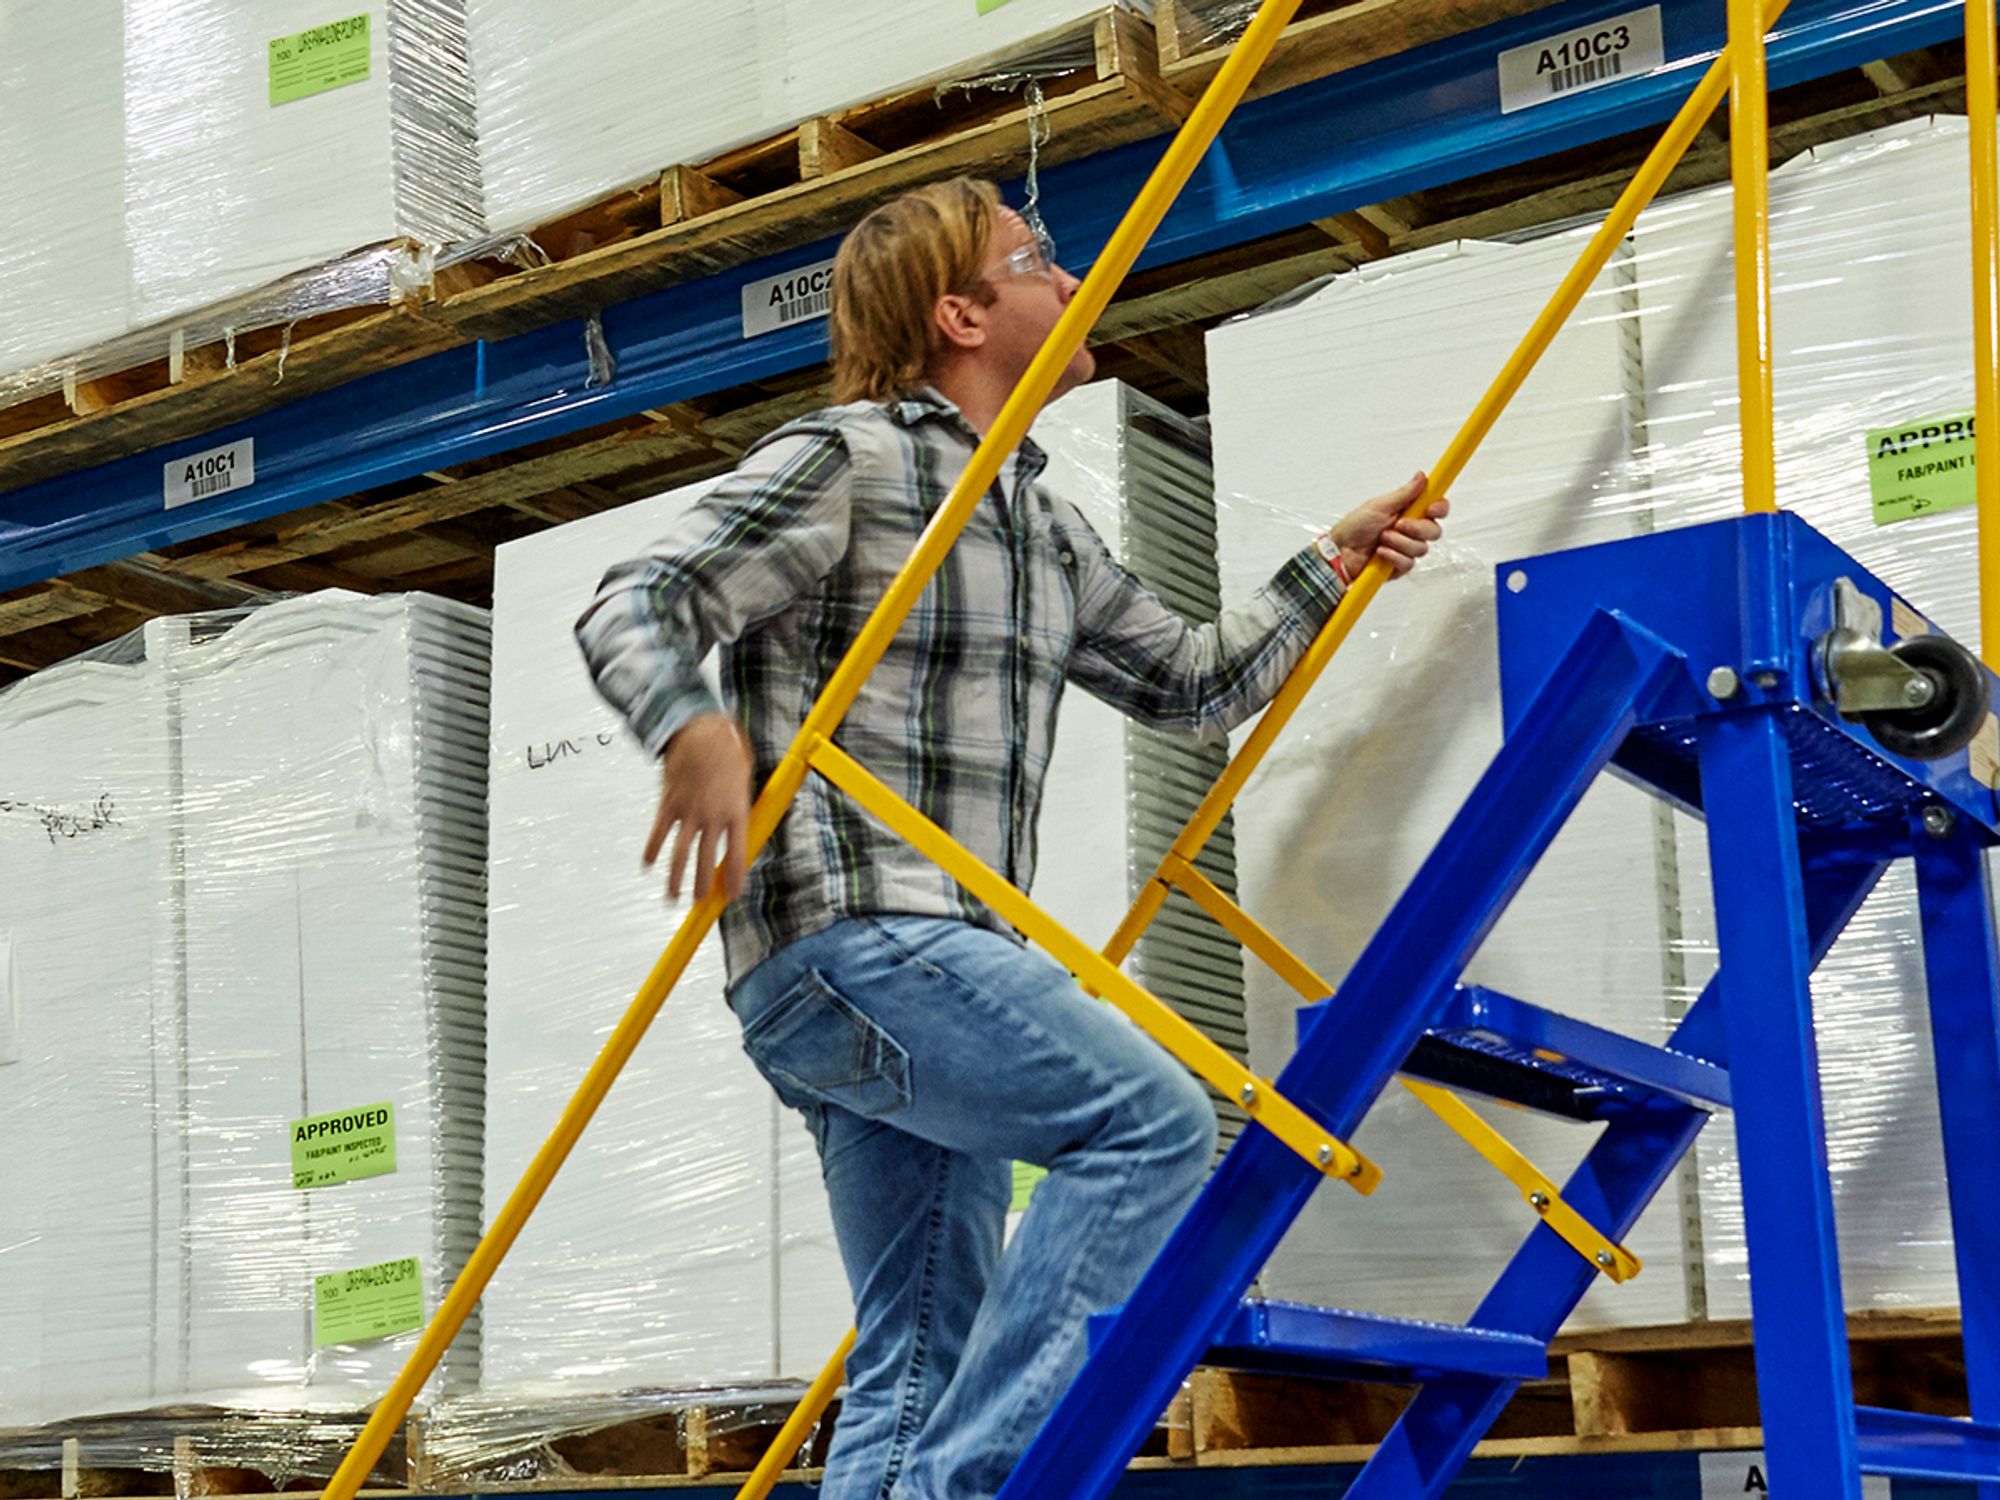 Protect workers using mobile ladder stands